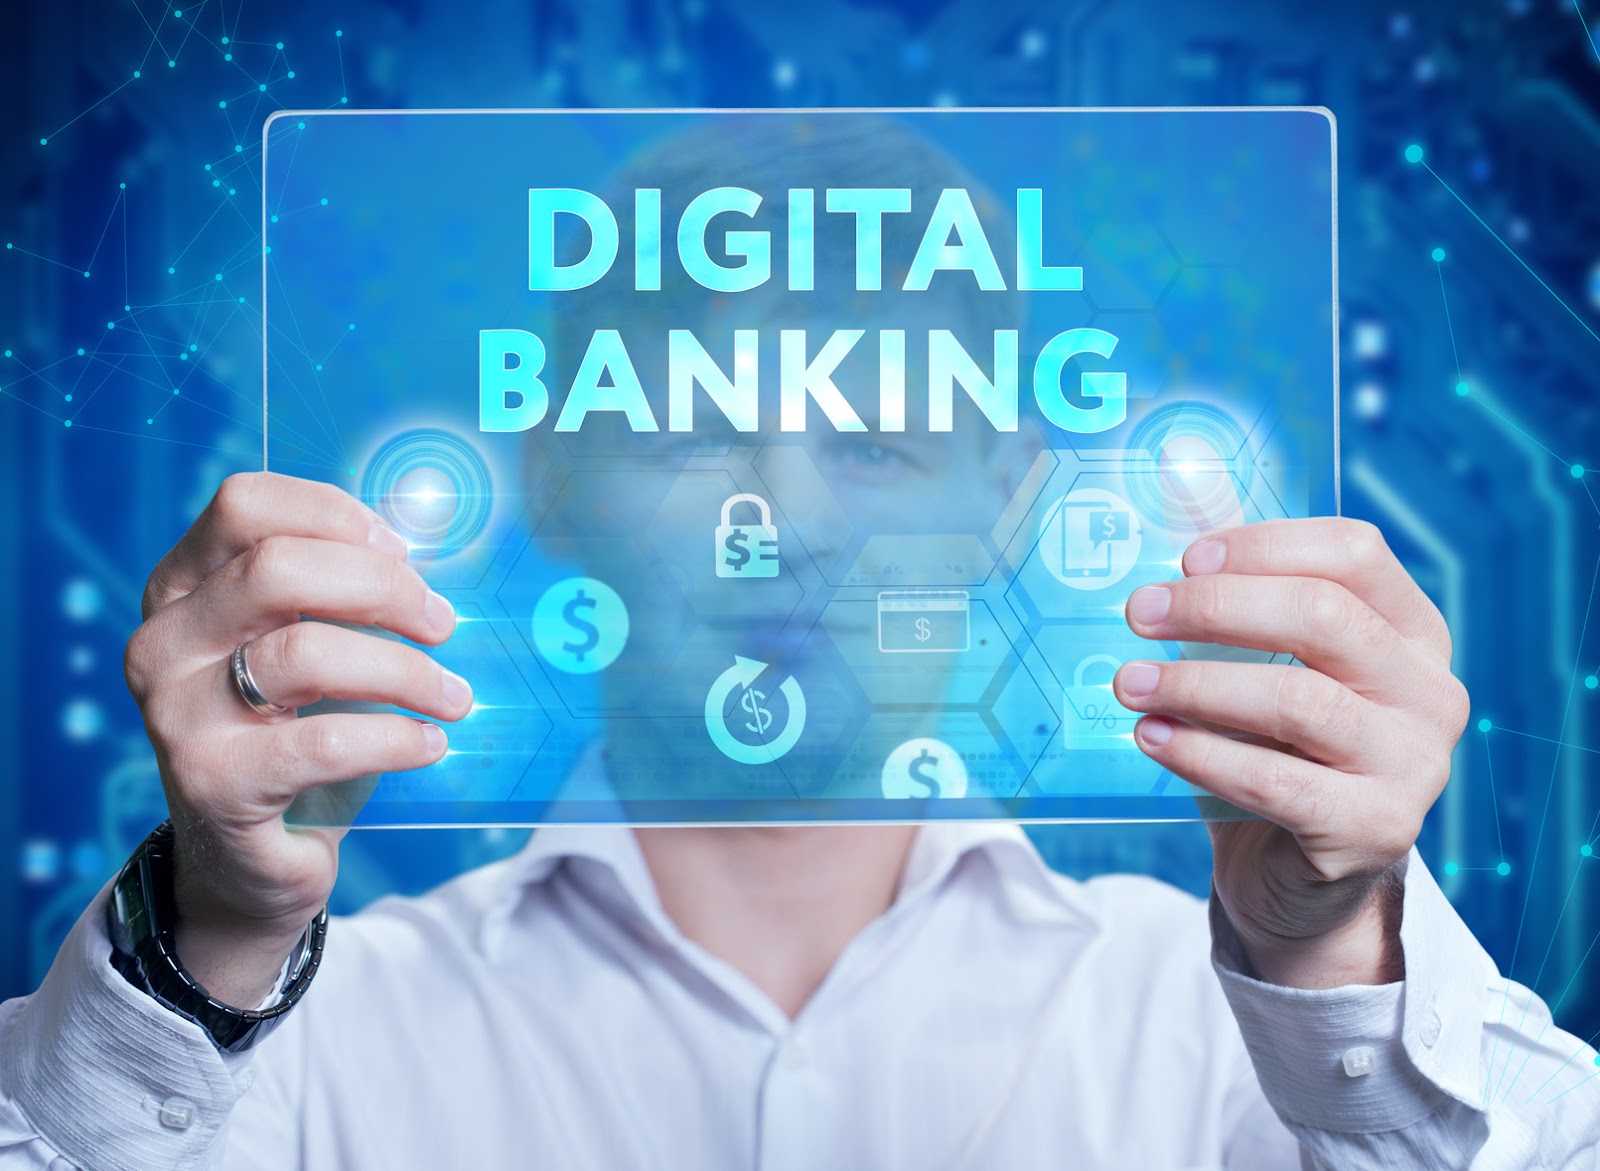 EXPLORE THE FUTURE OF DIGITAL BANKING TO STRIVE AHEAD